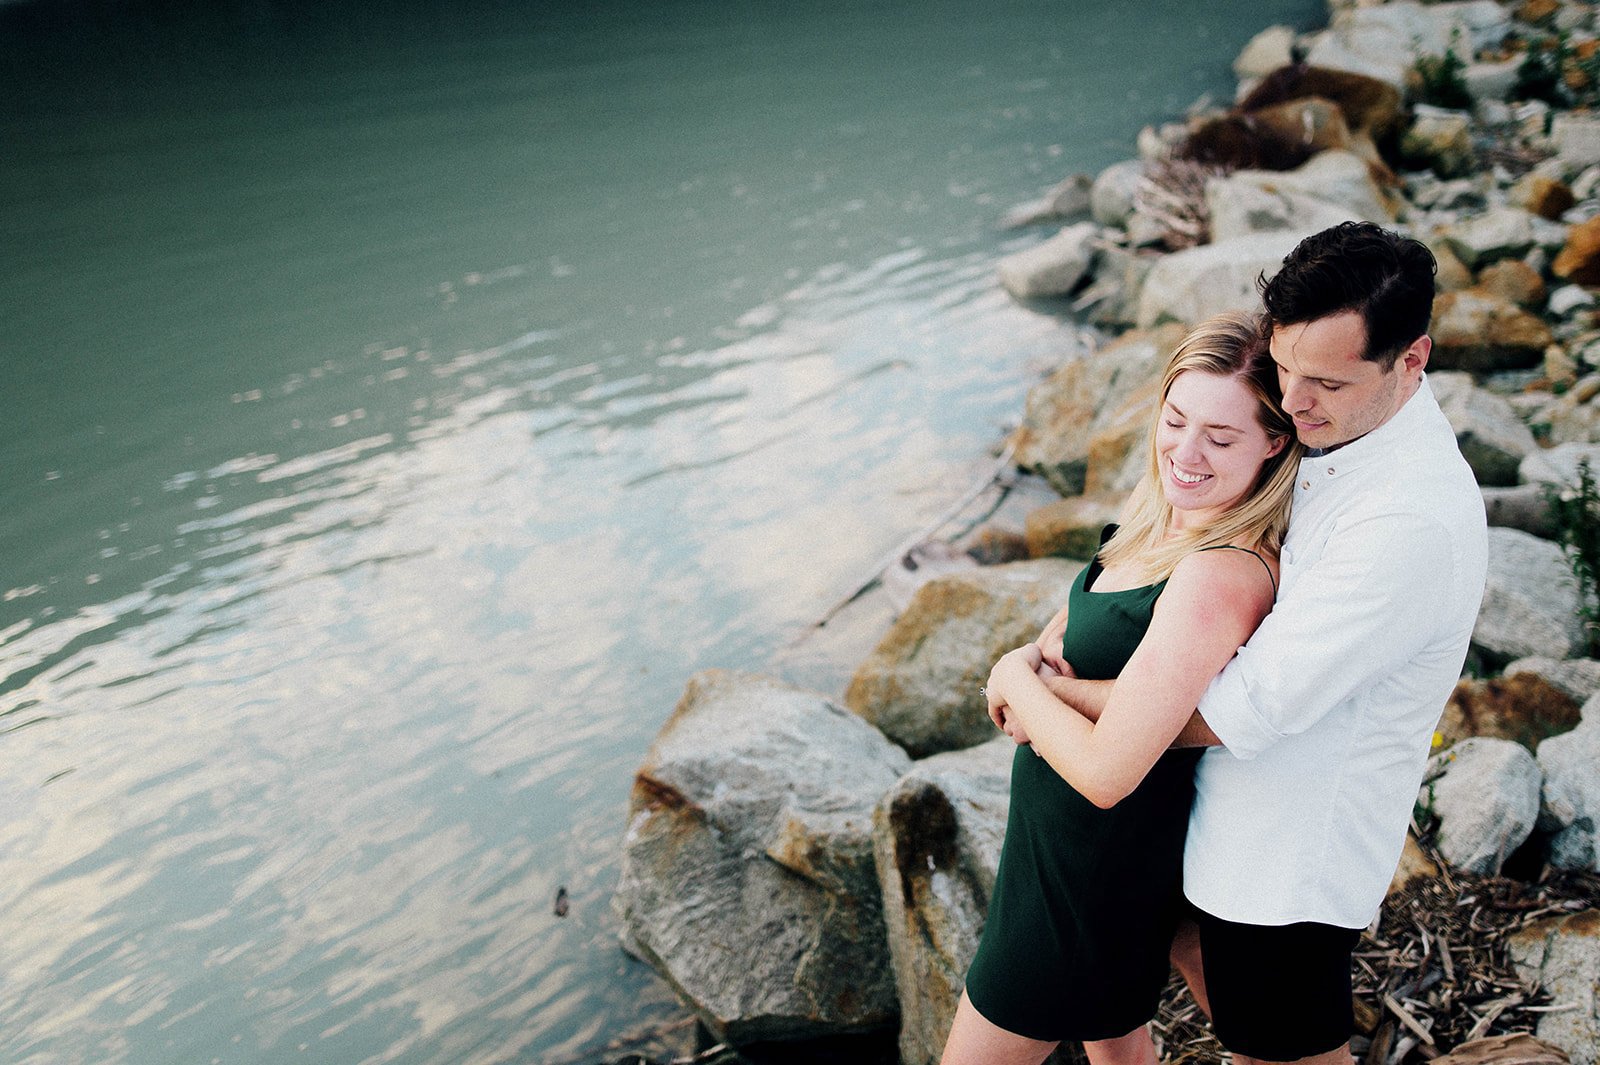 A man and woman in an green dress embrace in front of a scenic lake surrounded by mountains in Squamish, BC   